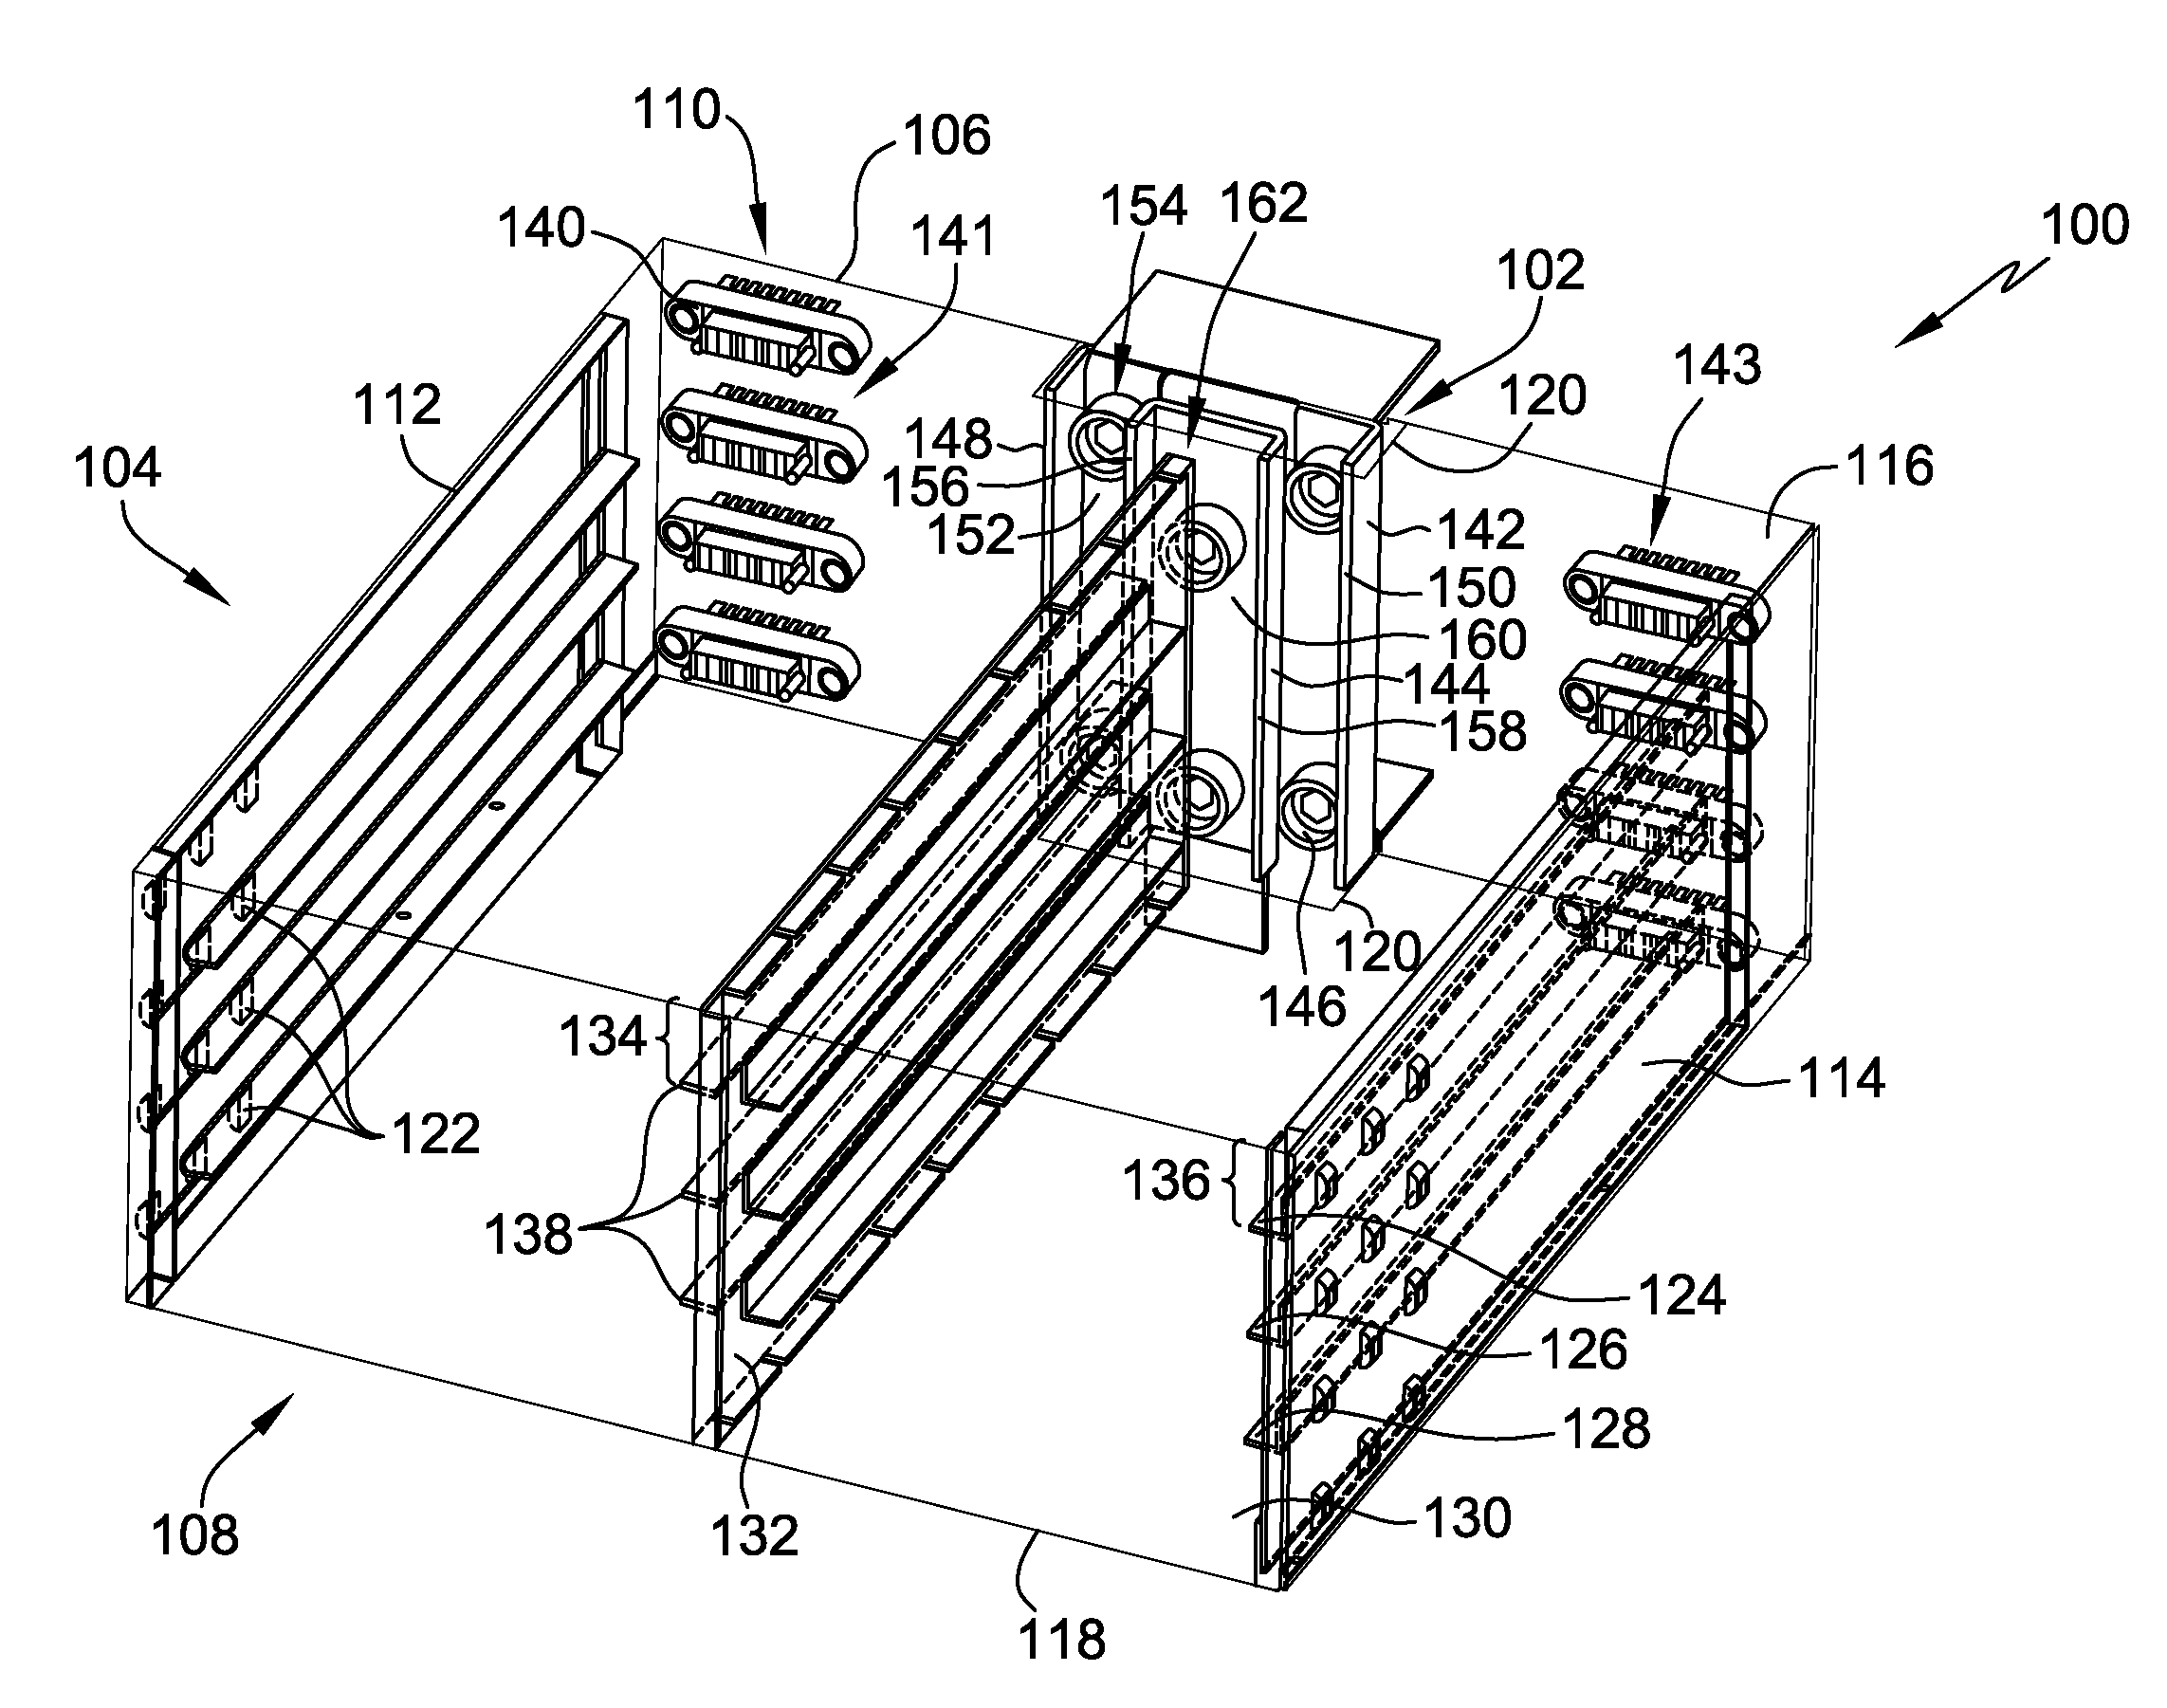 Power distribution rack bus bar assembly and method of assembling the same